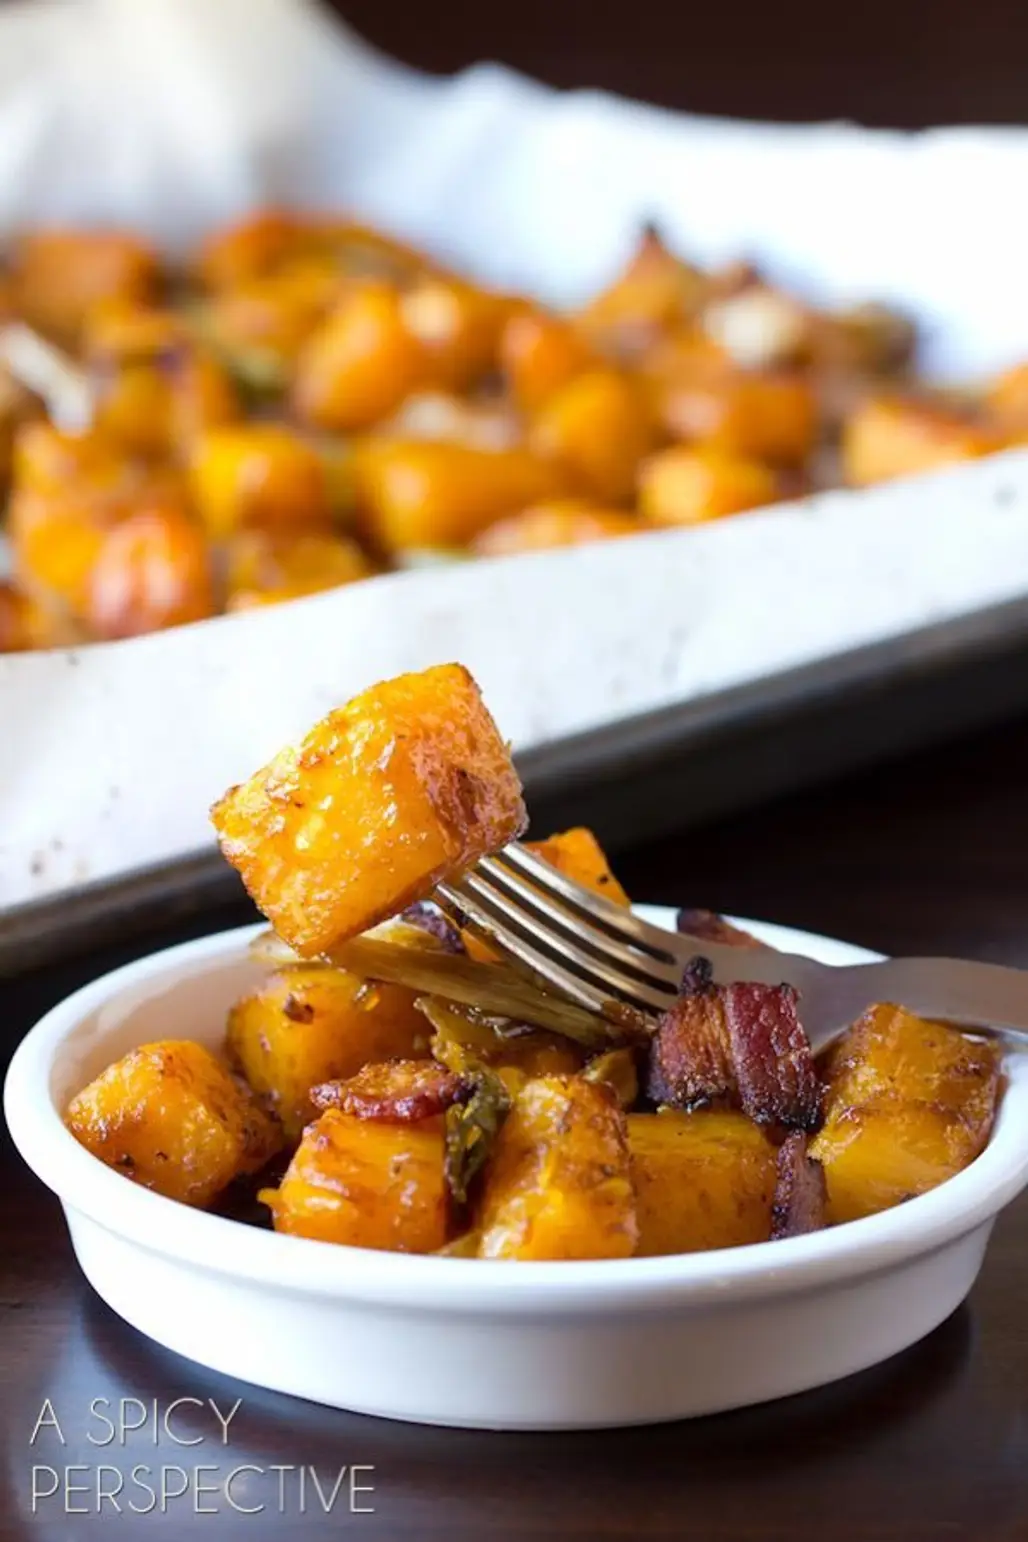 Roasted Butternut Squash with Leeks, Bacon and Apple Glaze